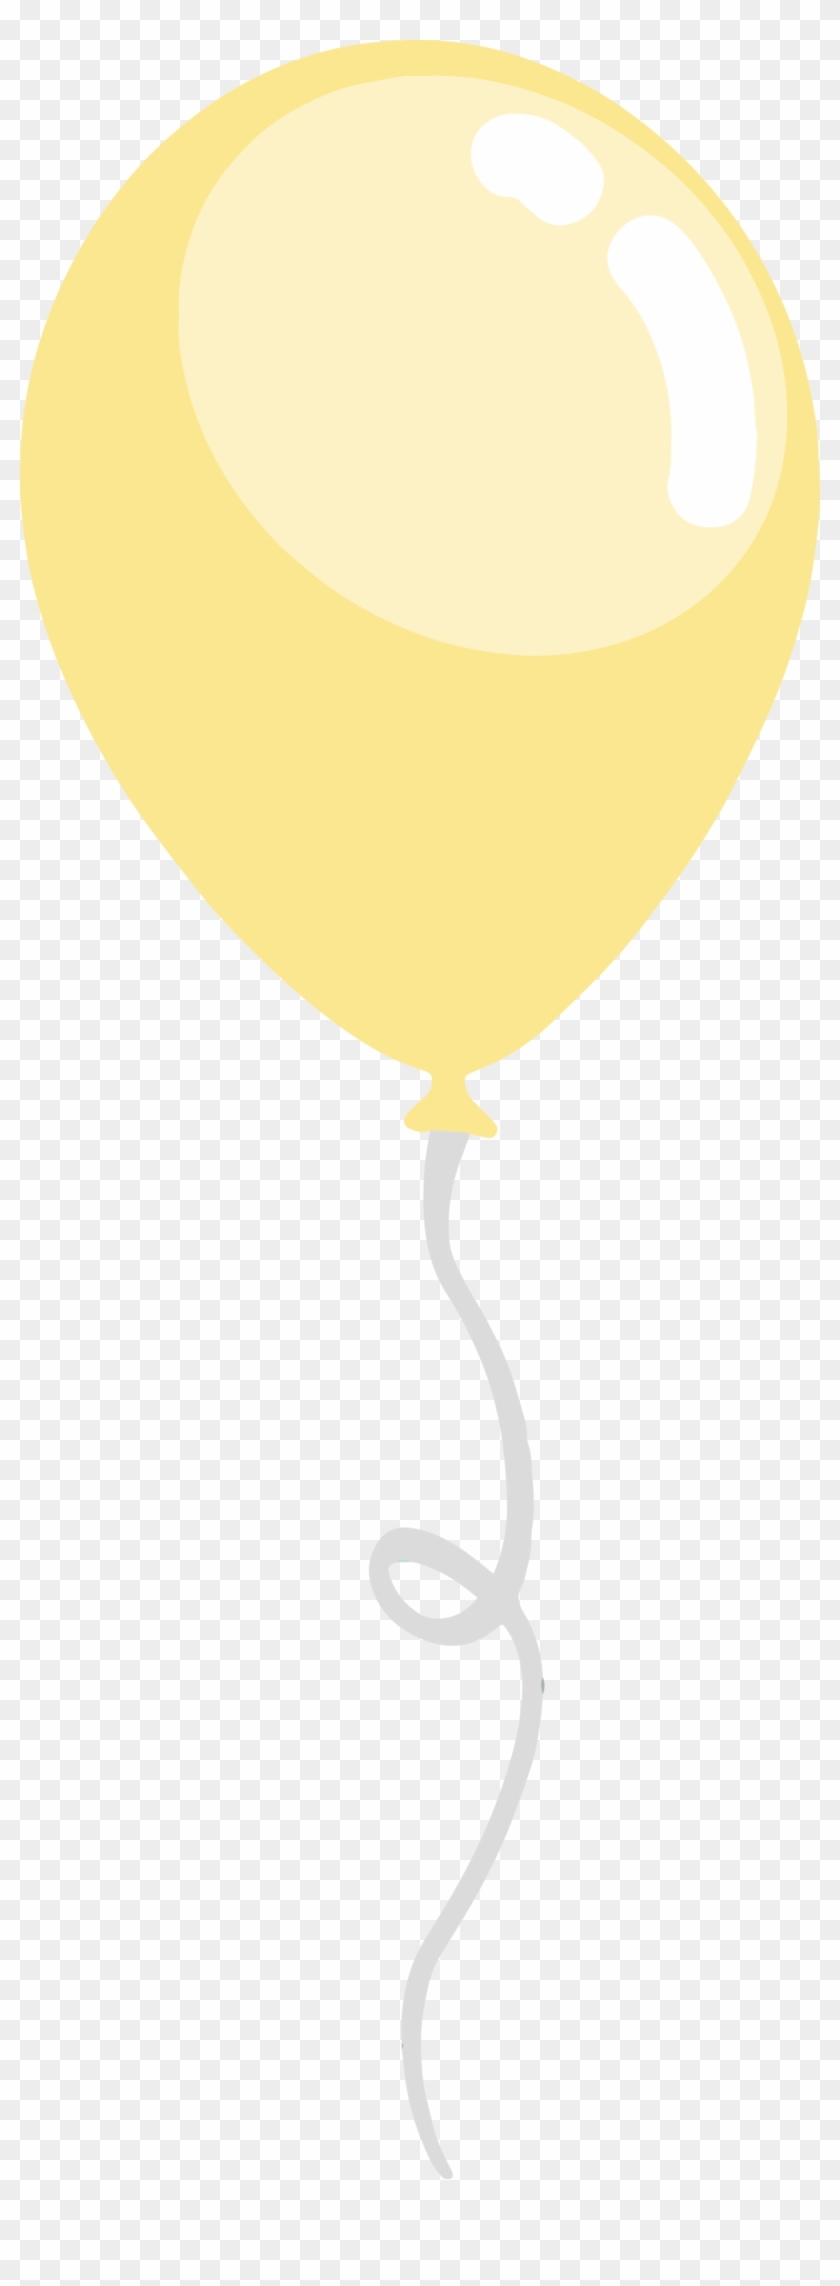 Pastel Yellow Balloons Png - Yellow Balloon Png Transparent Clipart #1494677